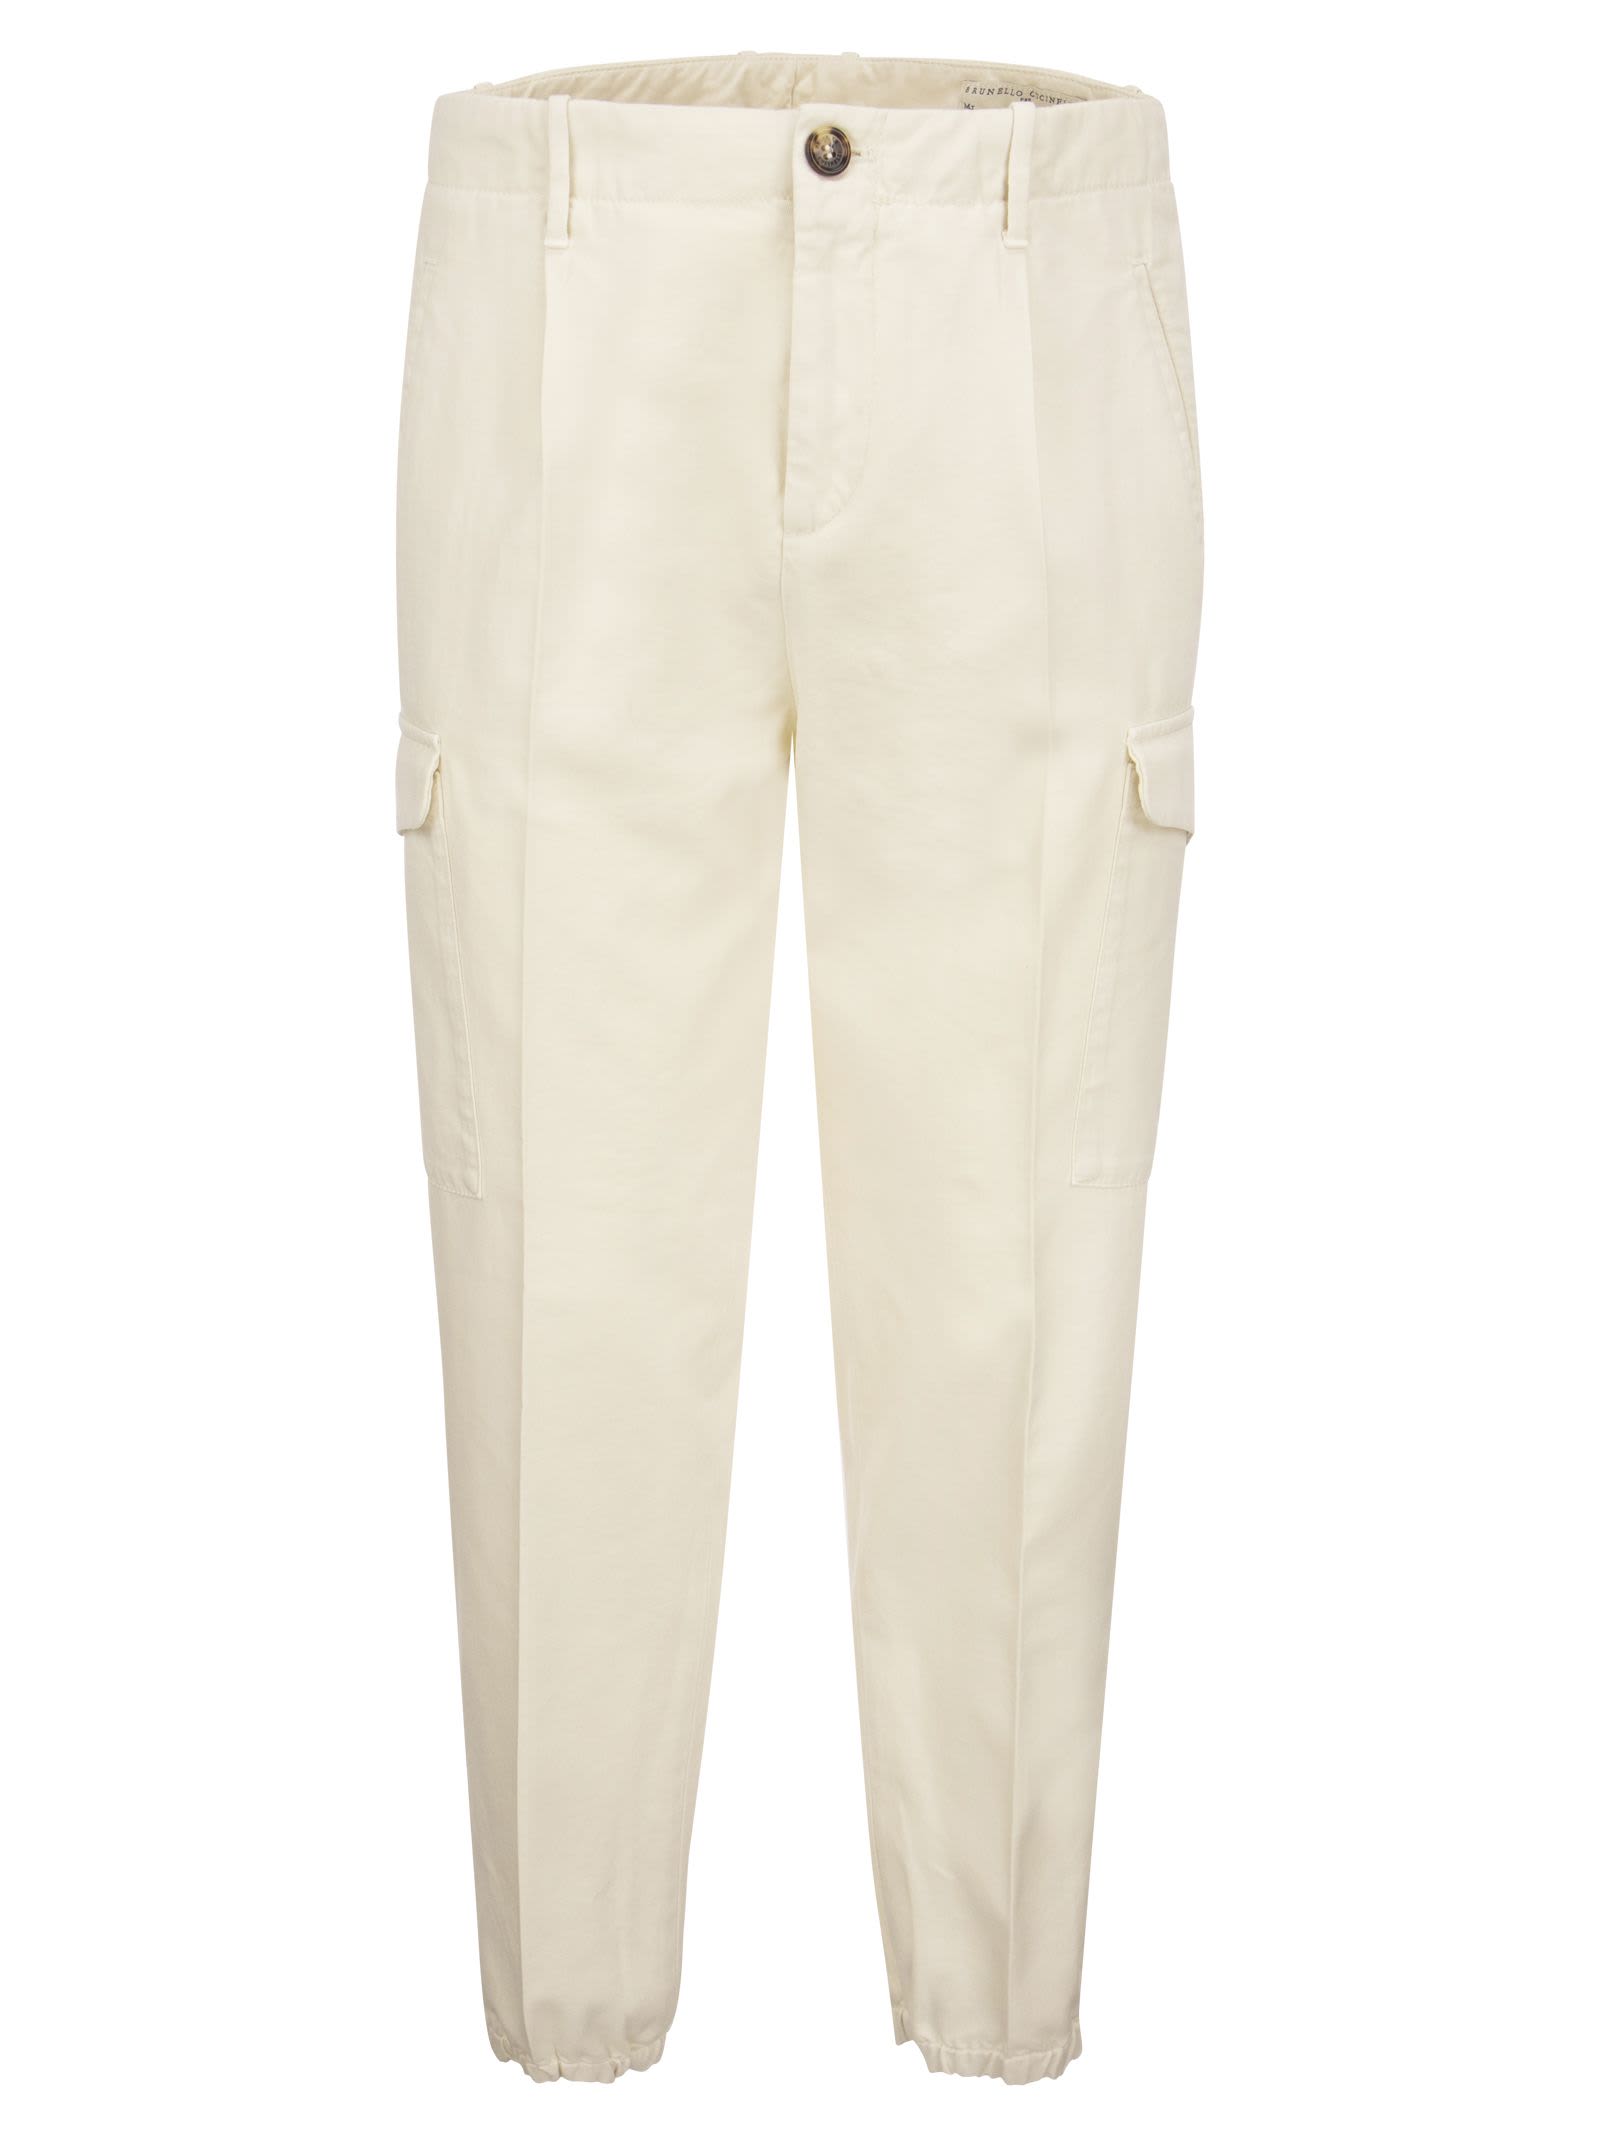 Brunello Cucinelli Ergonomic Fit Trousers In Garment-dyed Comfort Cotton Drill With Darts, Cargo Pockets And Zip At Hem